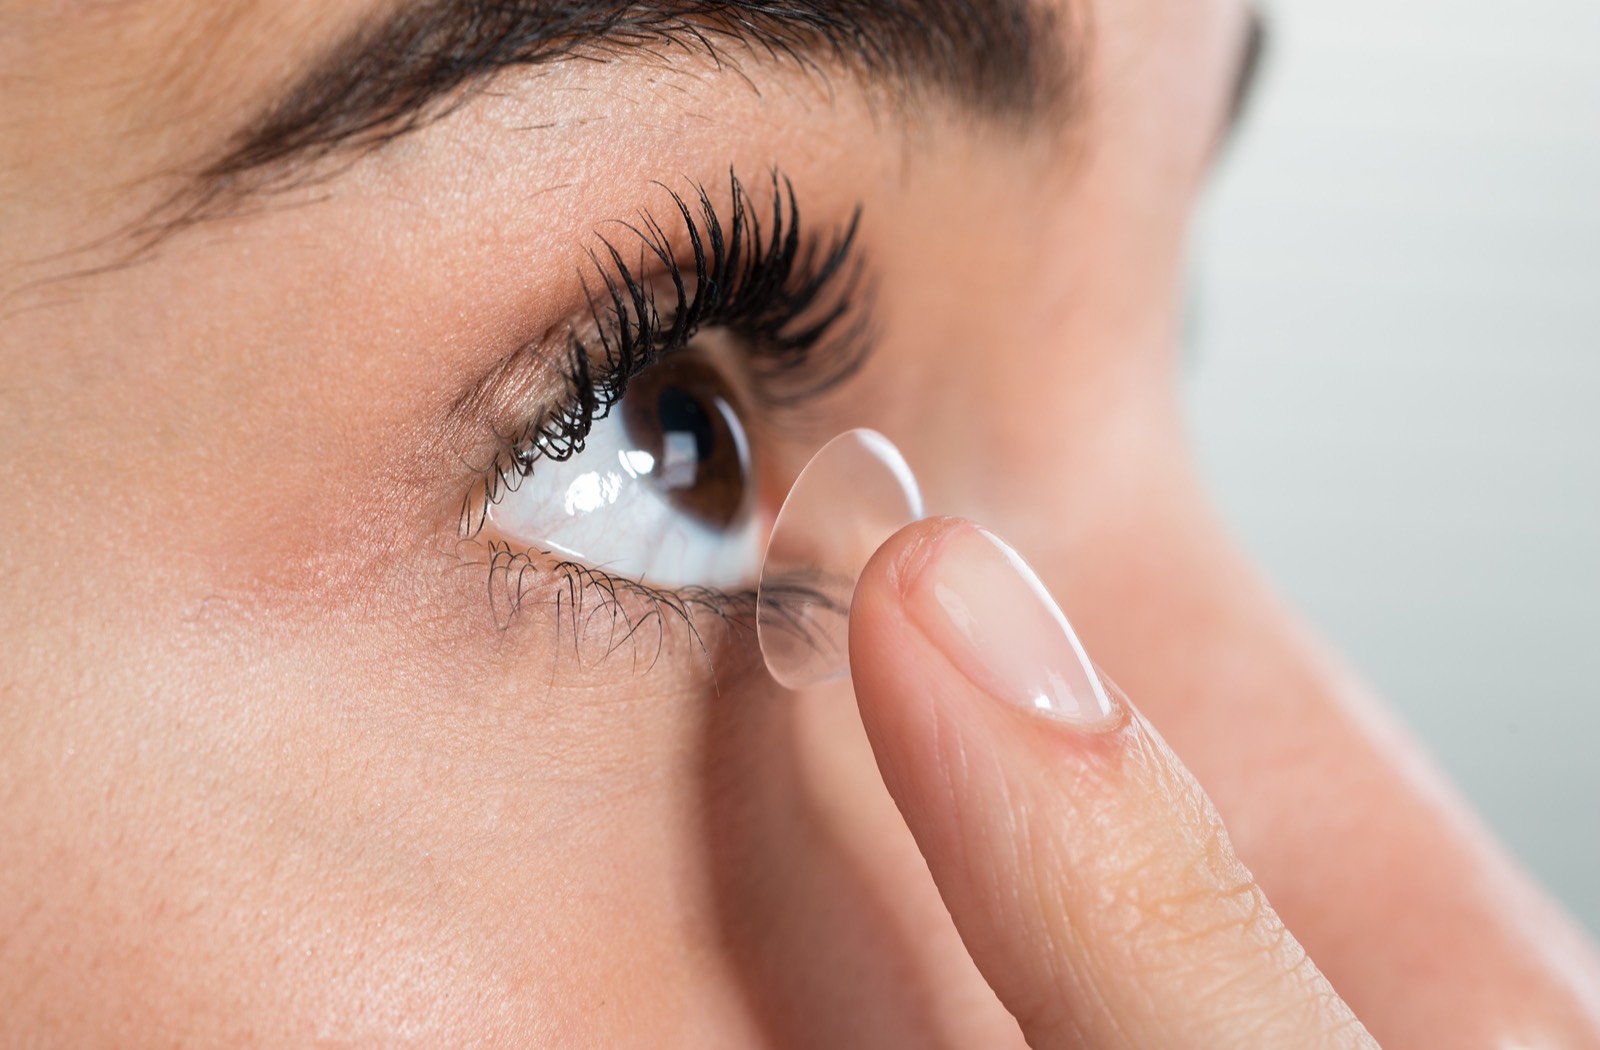 What are the long term side effects of contacts